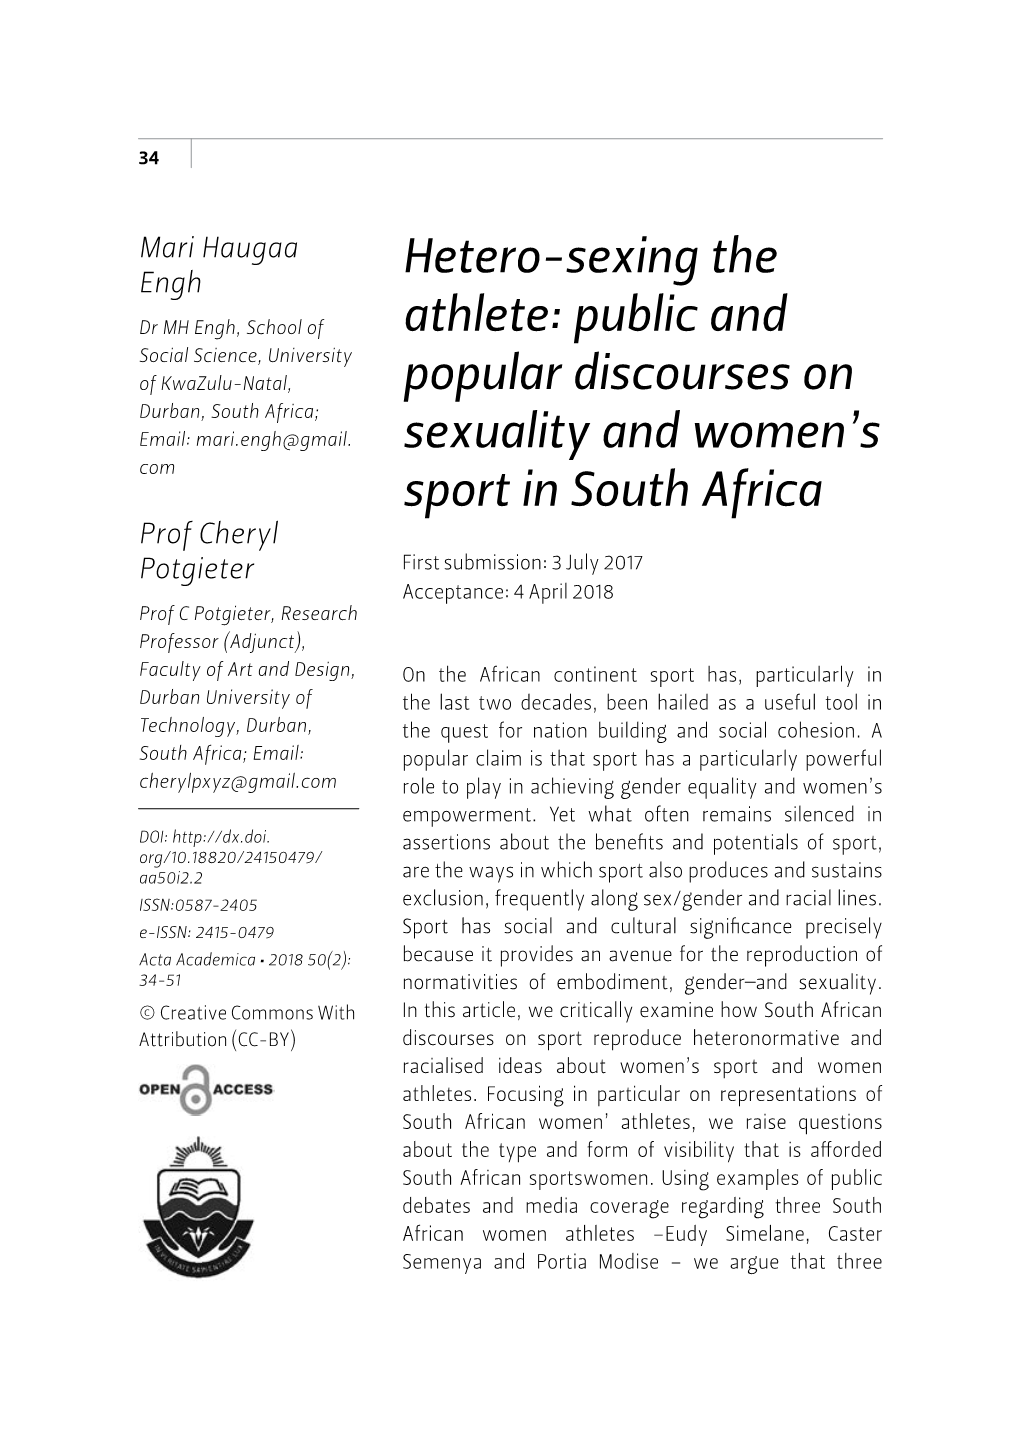 Hetero-Sexing the Athlete: Public and Popular Discourses on Sexuality